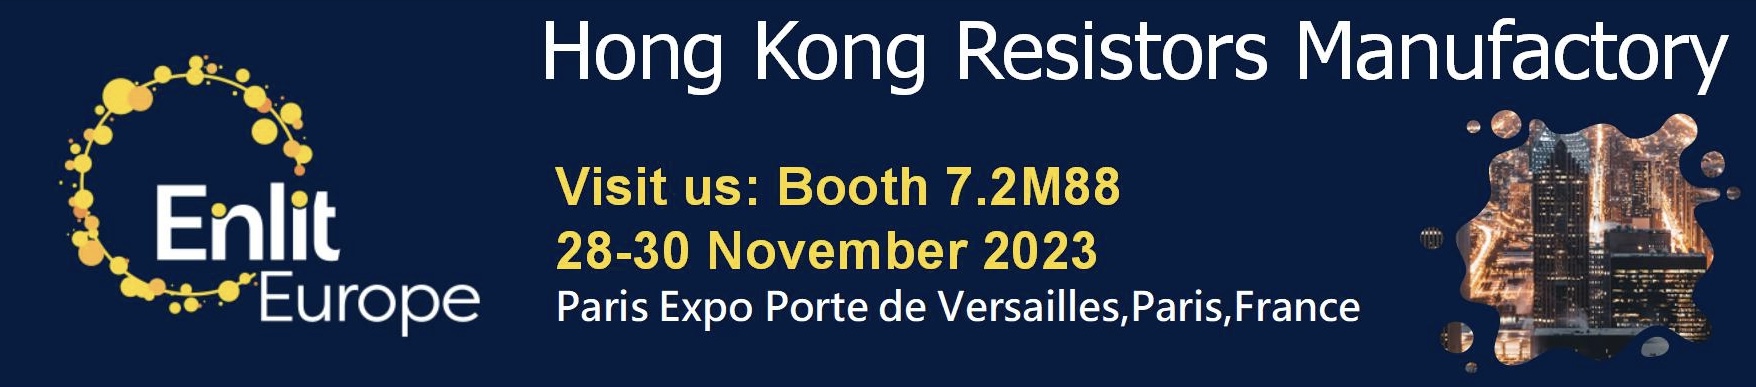 Participate in Enlit Europe 2023 Exhibition from November 28-30, 2023. Please visit our Booth No. 7.2M88